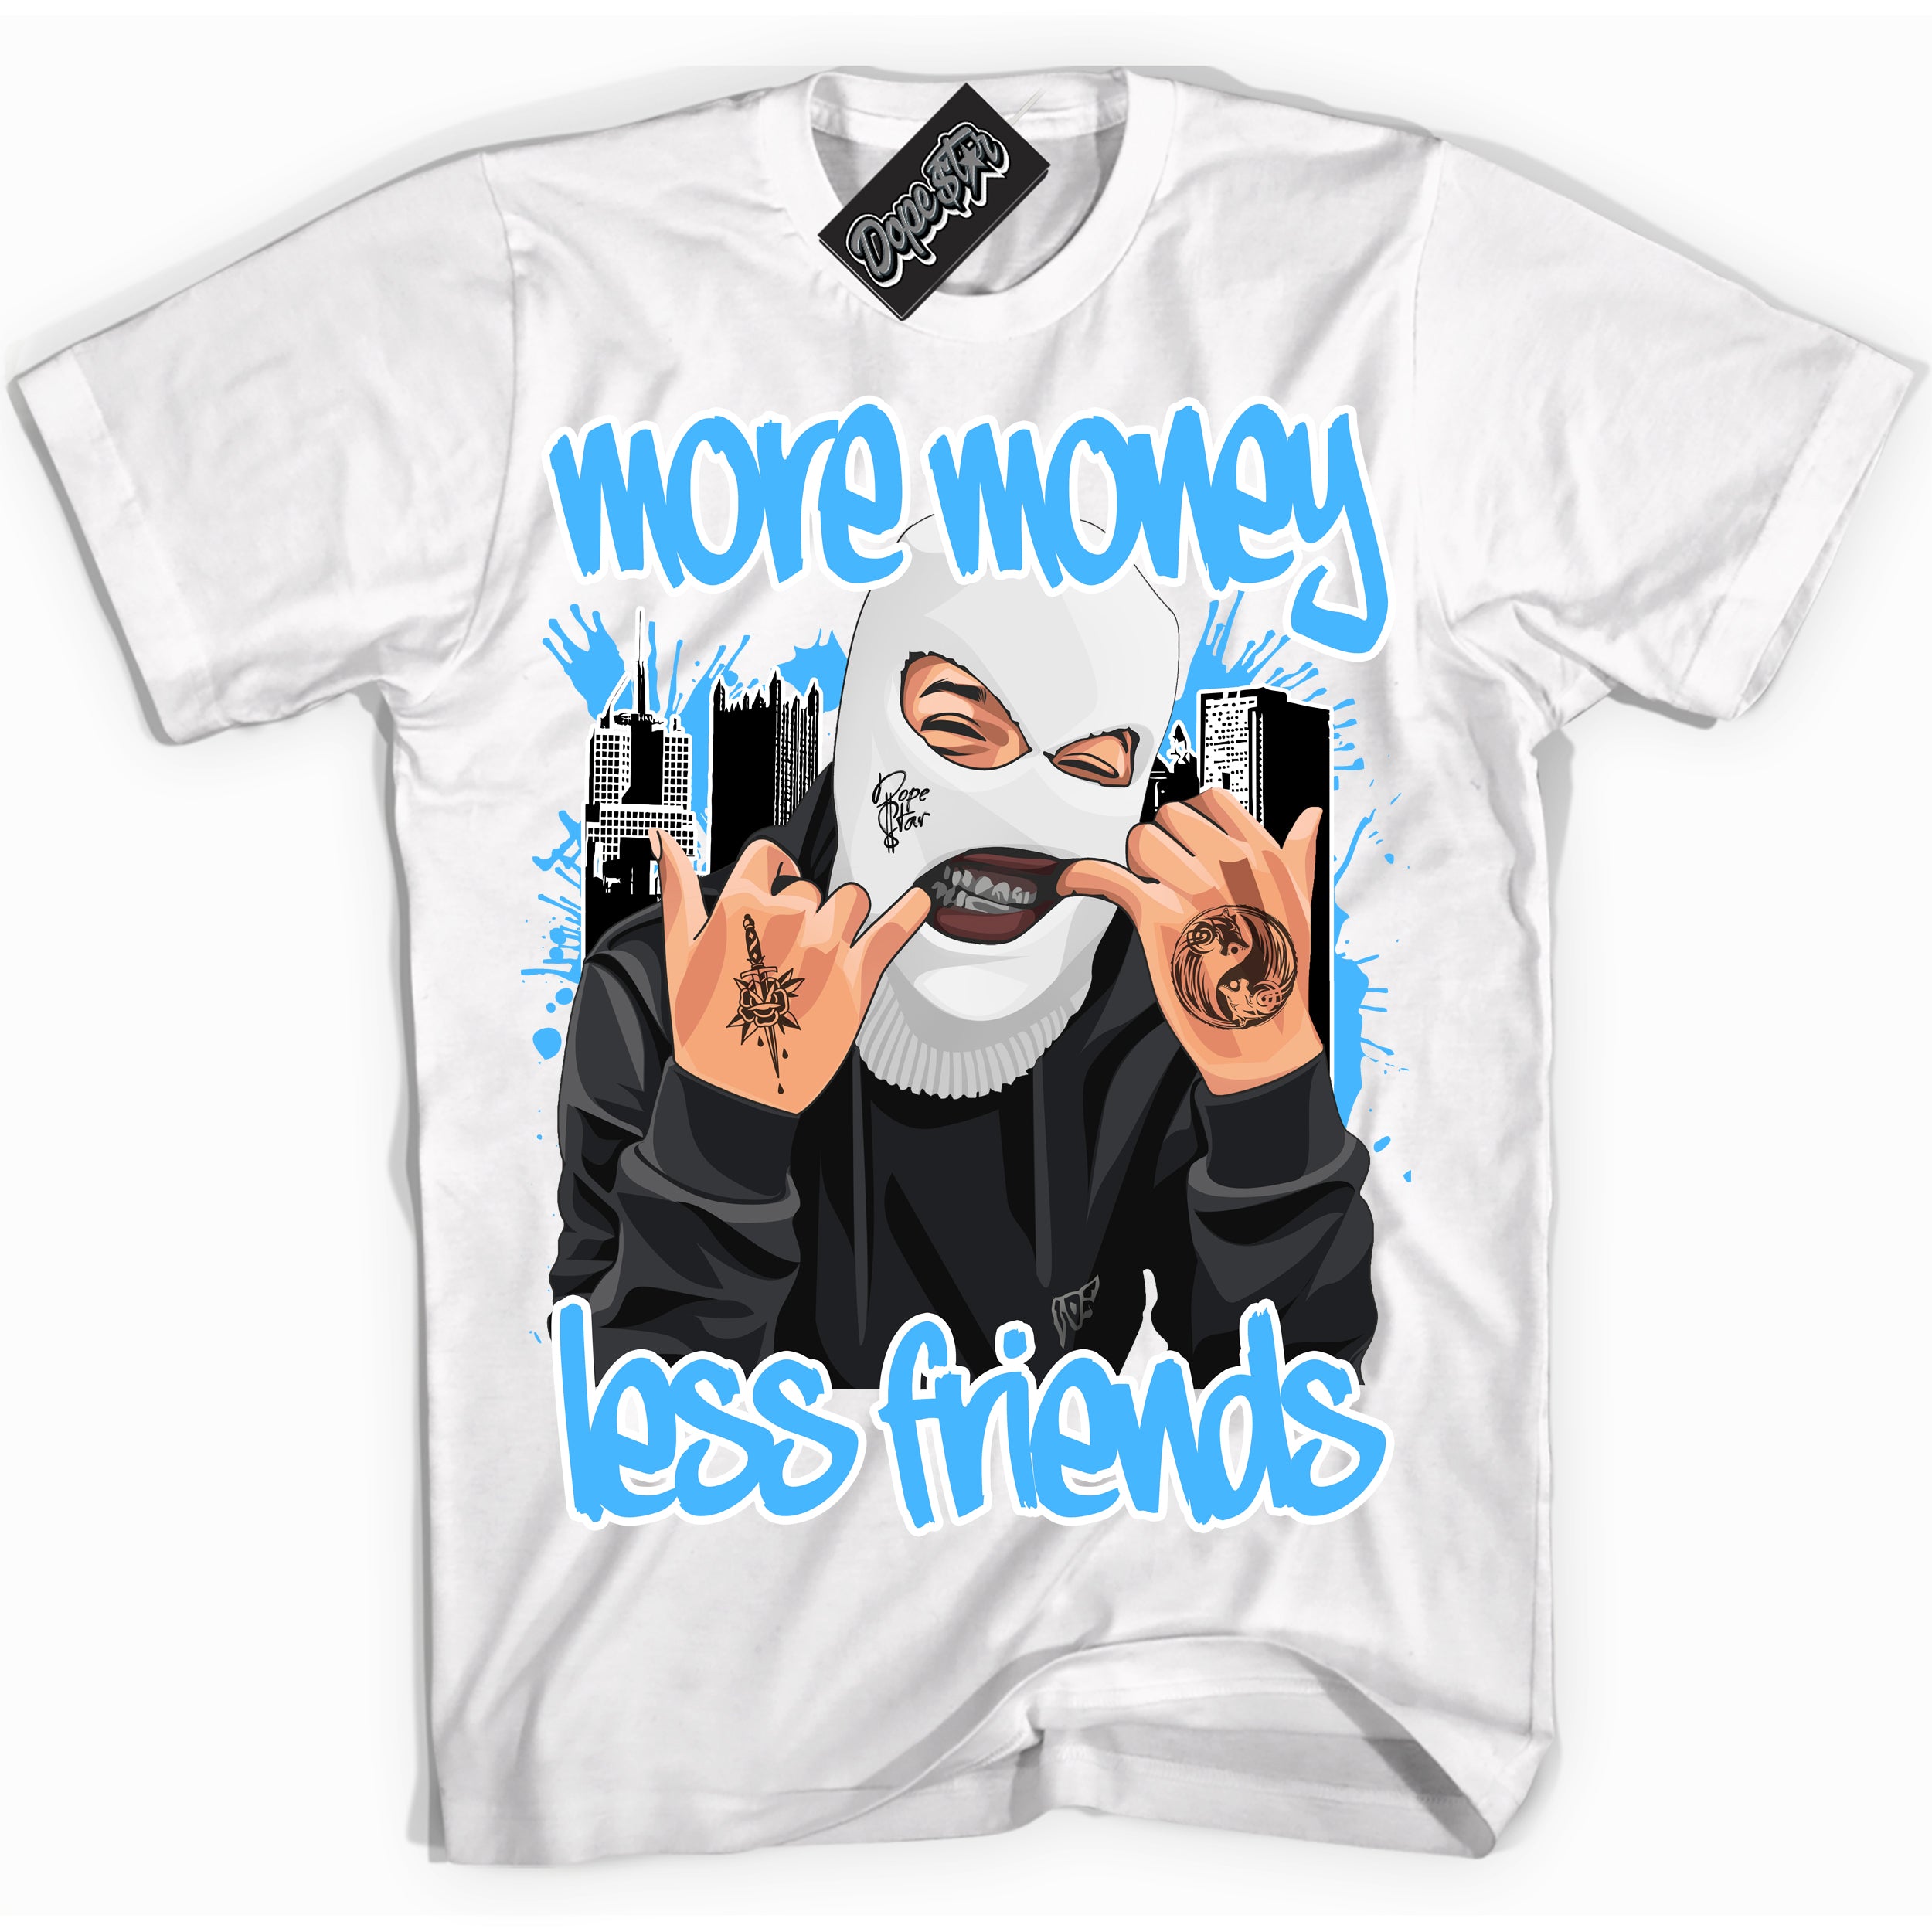 Cool White graphic tee with “ Money More Less Friends ” design, that perfectly matches Powder Blue 9s sneakers 